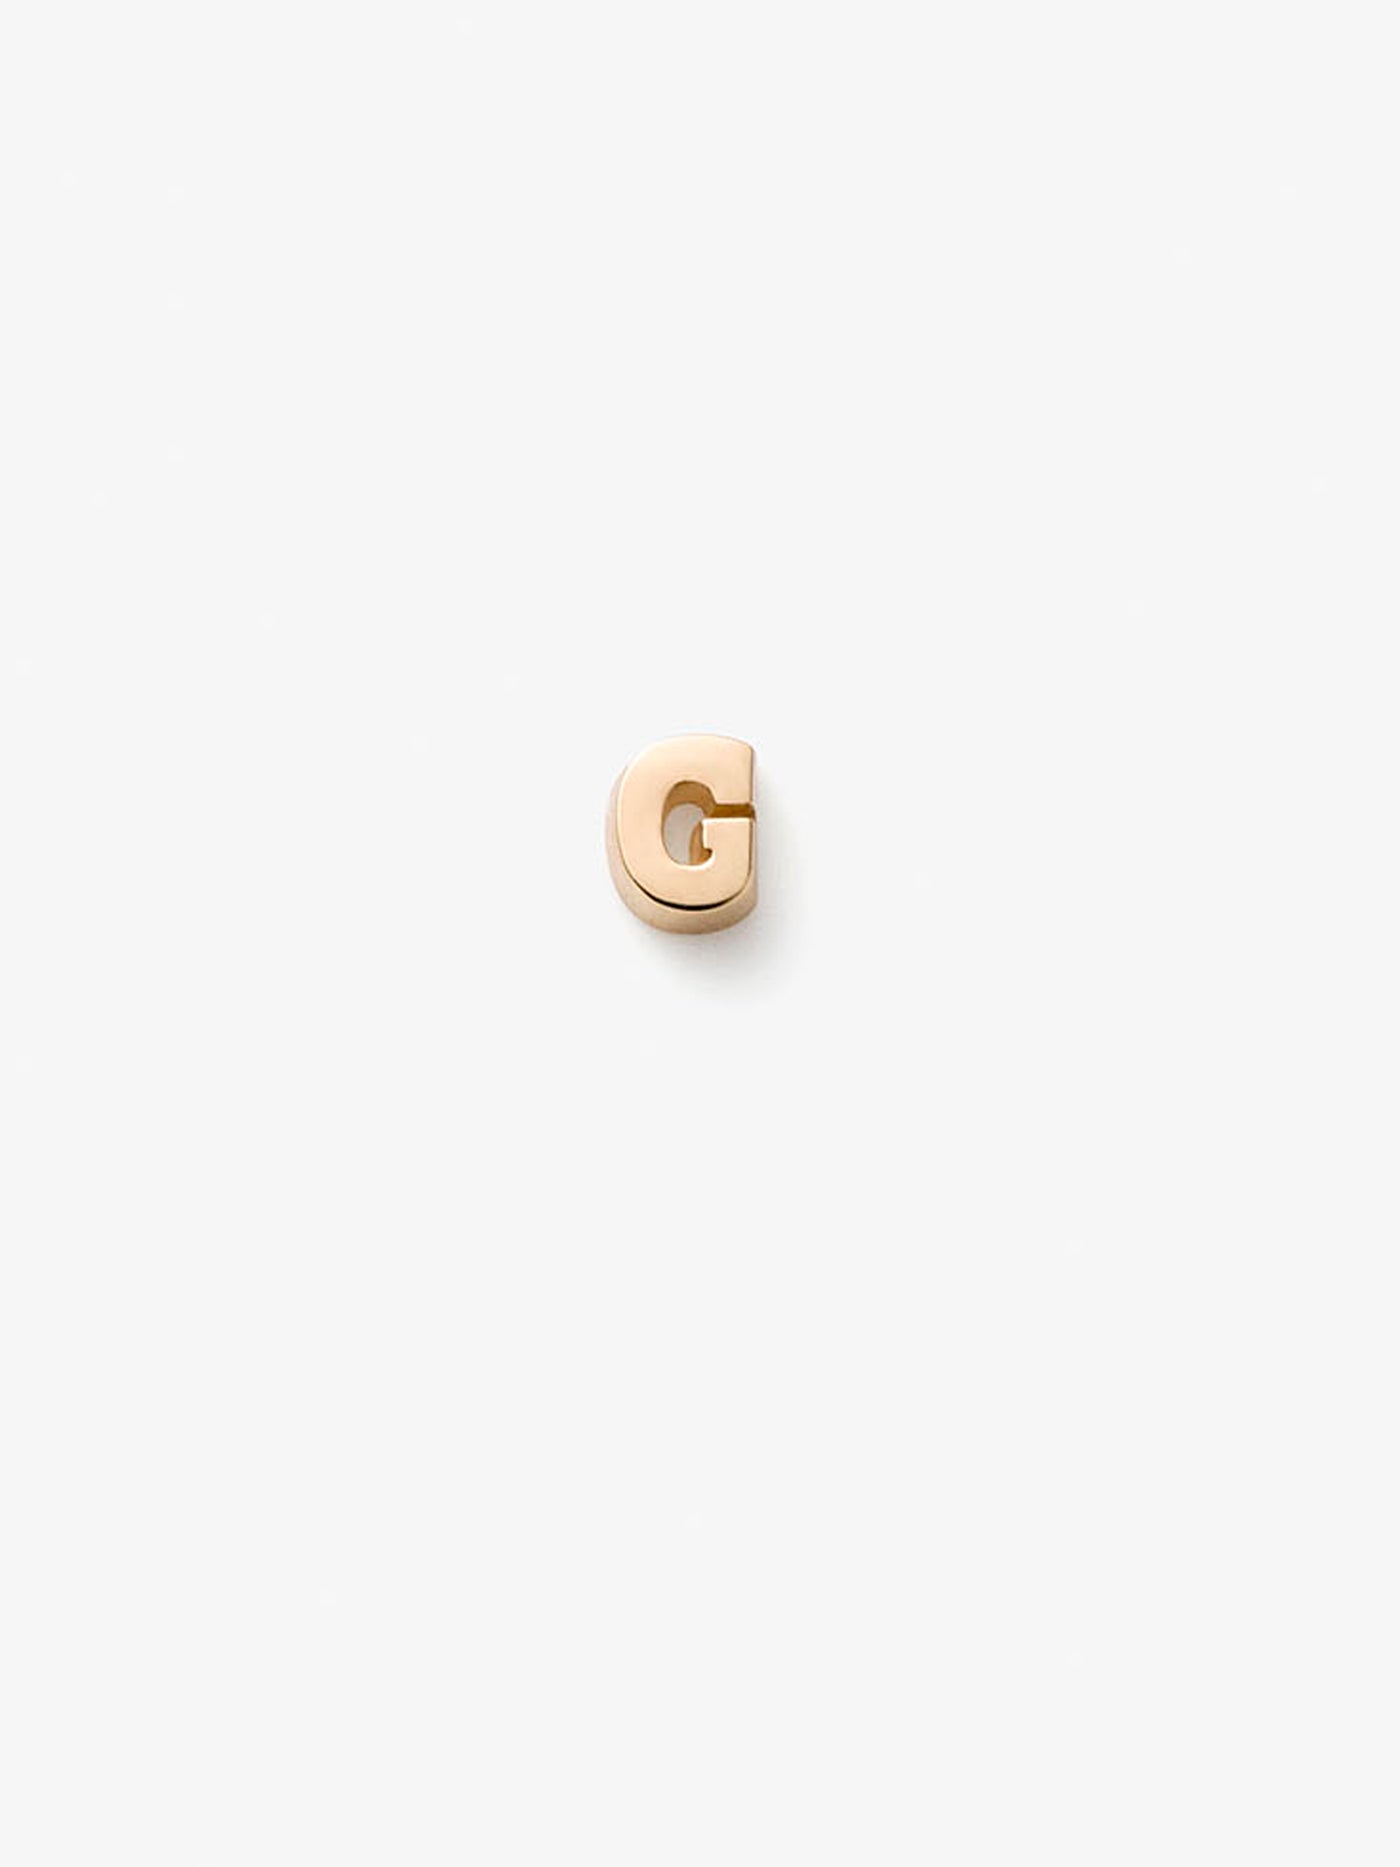 Miniature letter G single stud earring in 18k solid gold with a butterfly fastening for pierced ears.